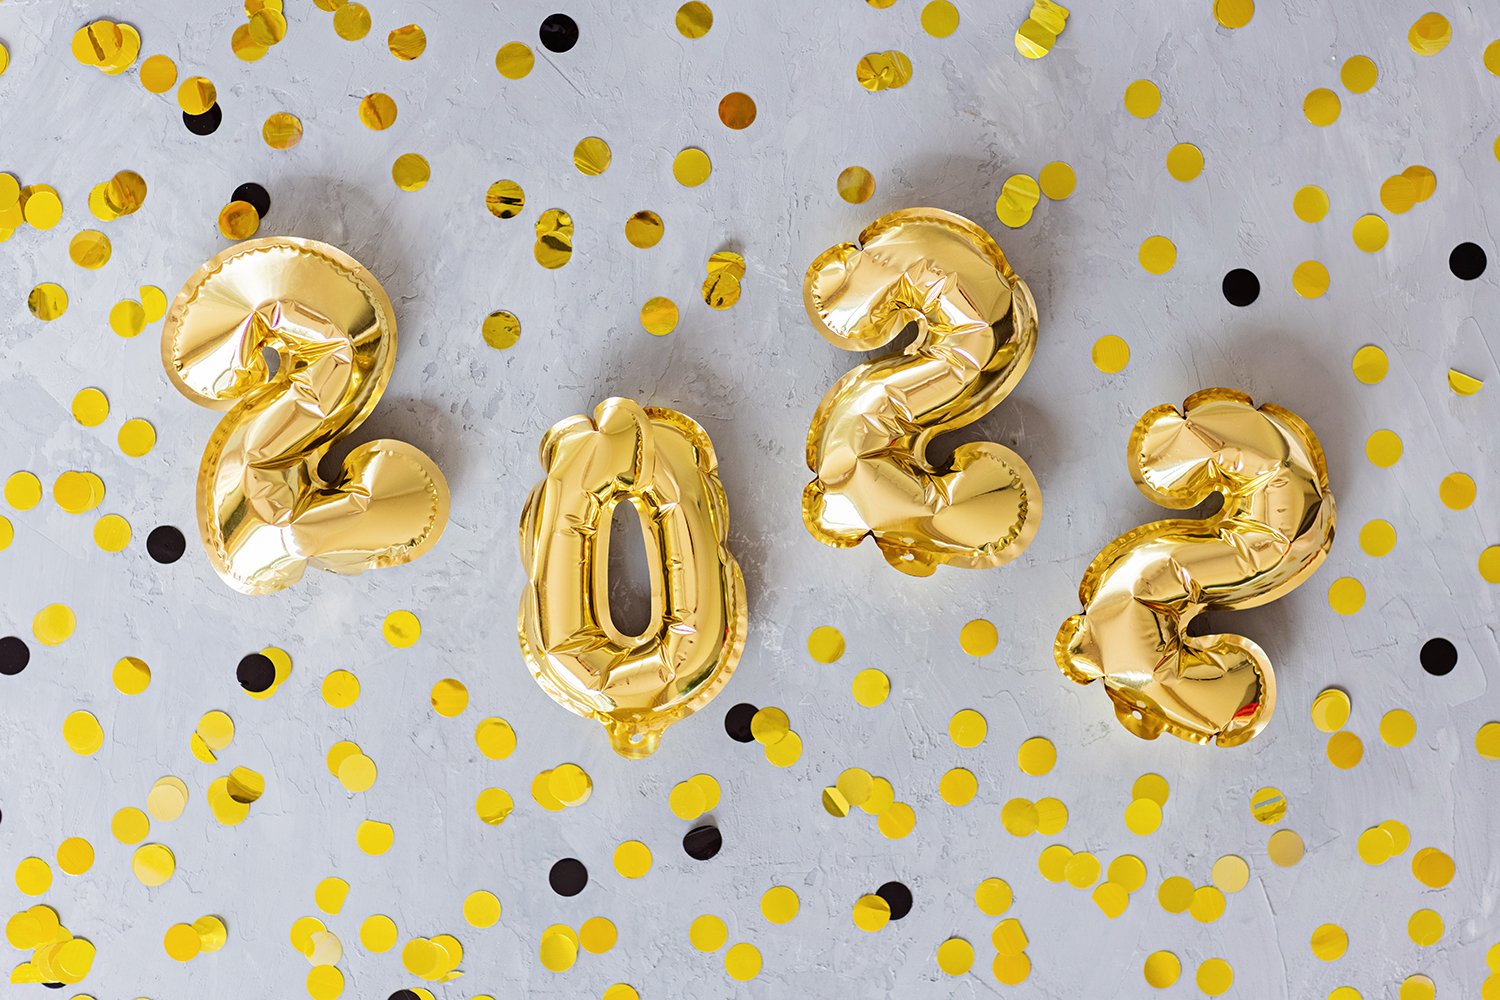 10 Simple New Year's Goals to Start Working Towards Right Now